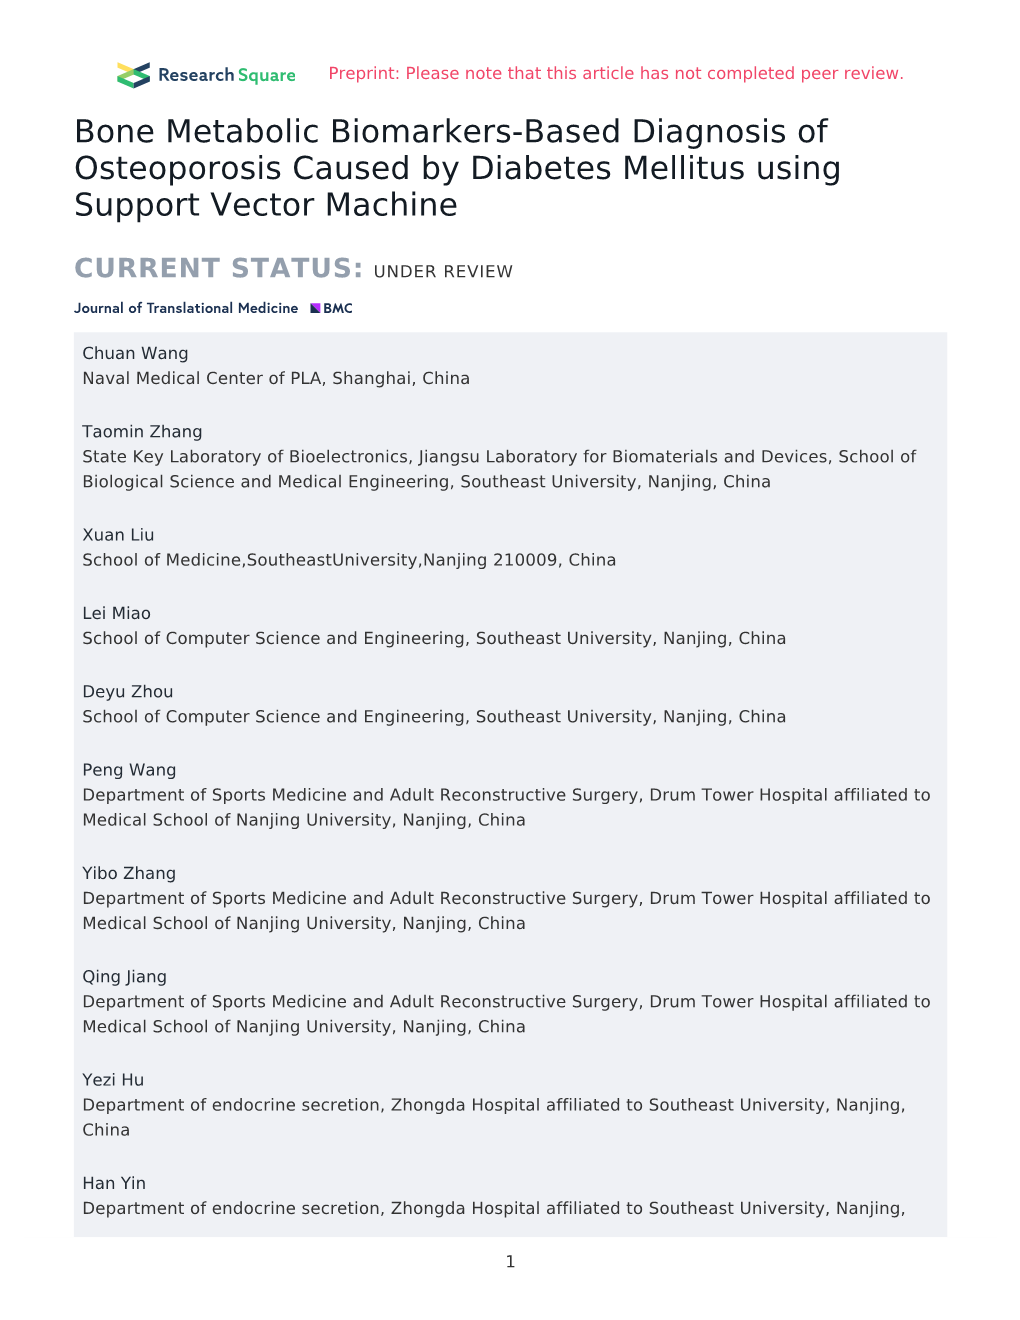 Bone Metabolic Biomarkers-Based Diagnosis of Osteoporosis Caused by Diabetes Mellitus Using Support Vector Machine